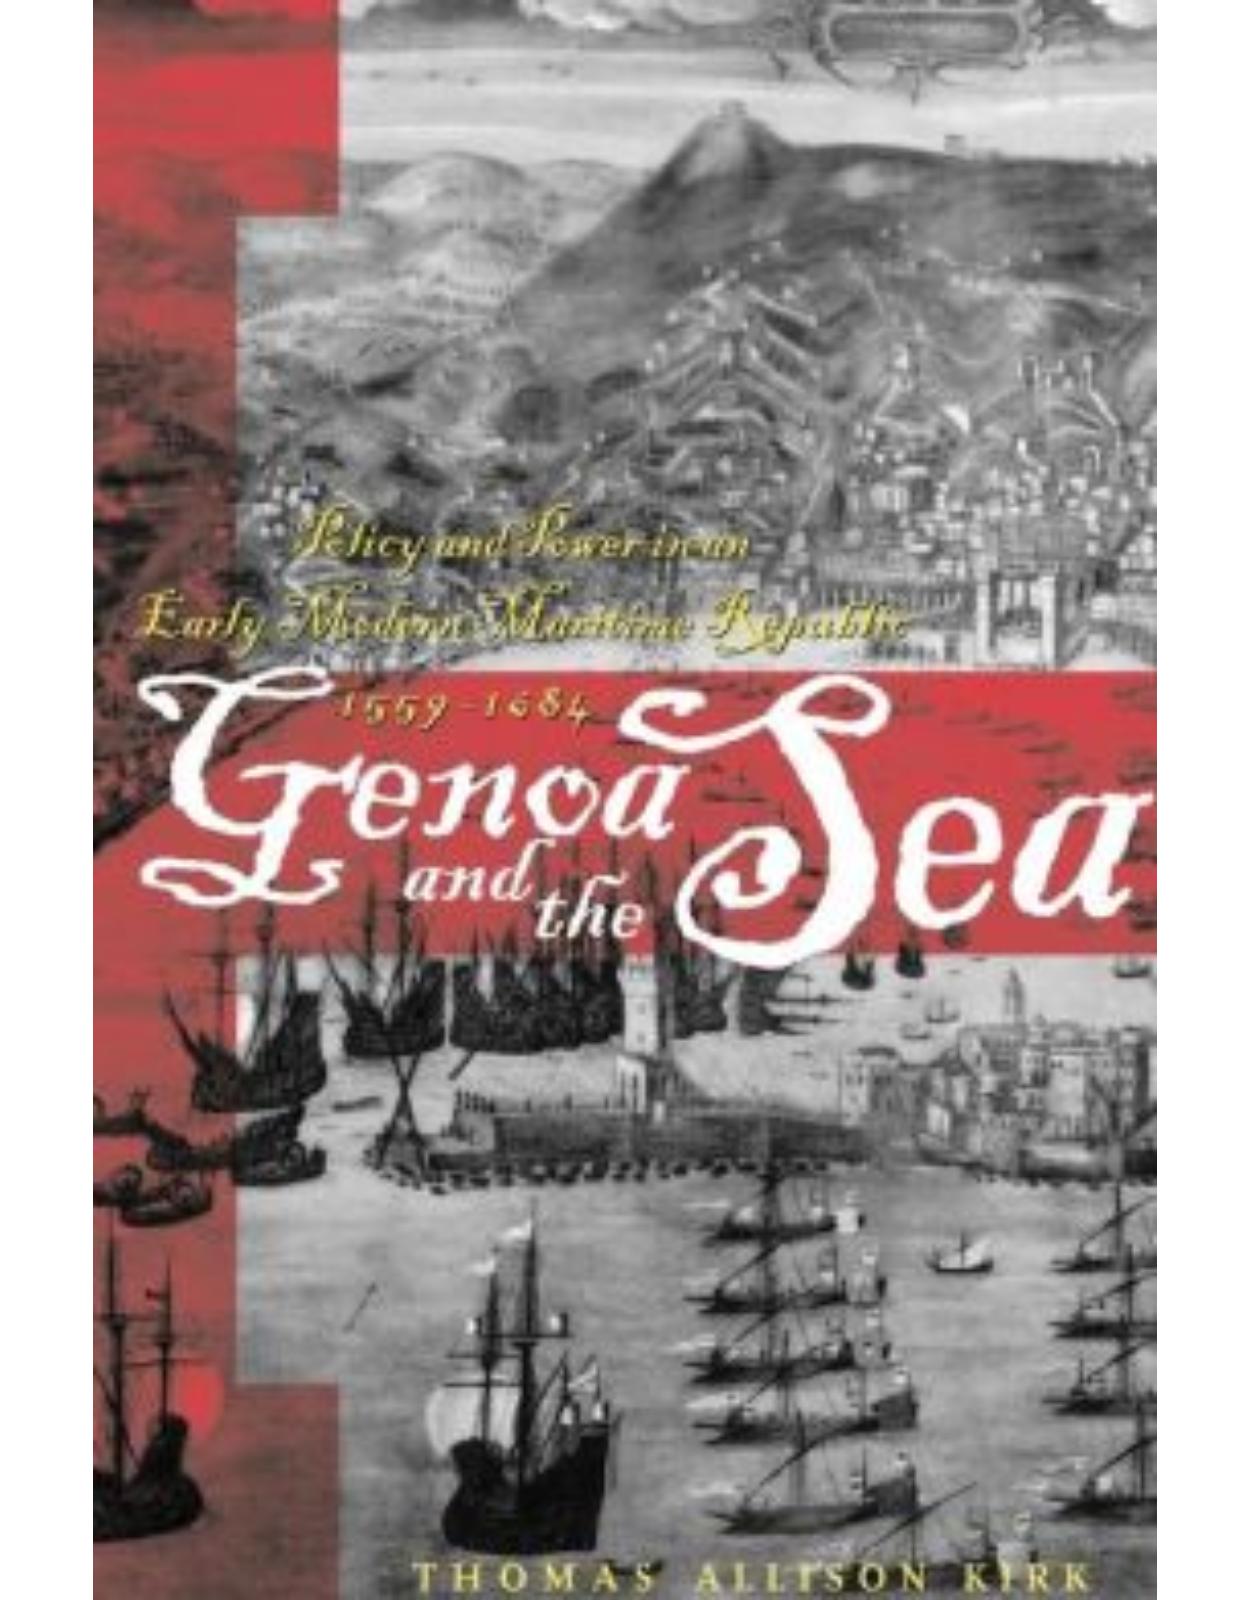 Genoa and the Sea. Policy and Power in an Early Modern Maritime Republic, 1559-1684